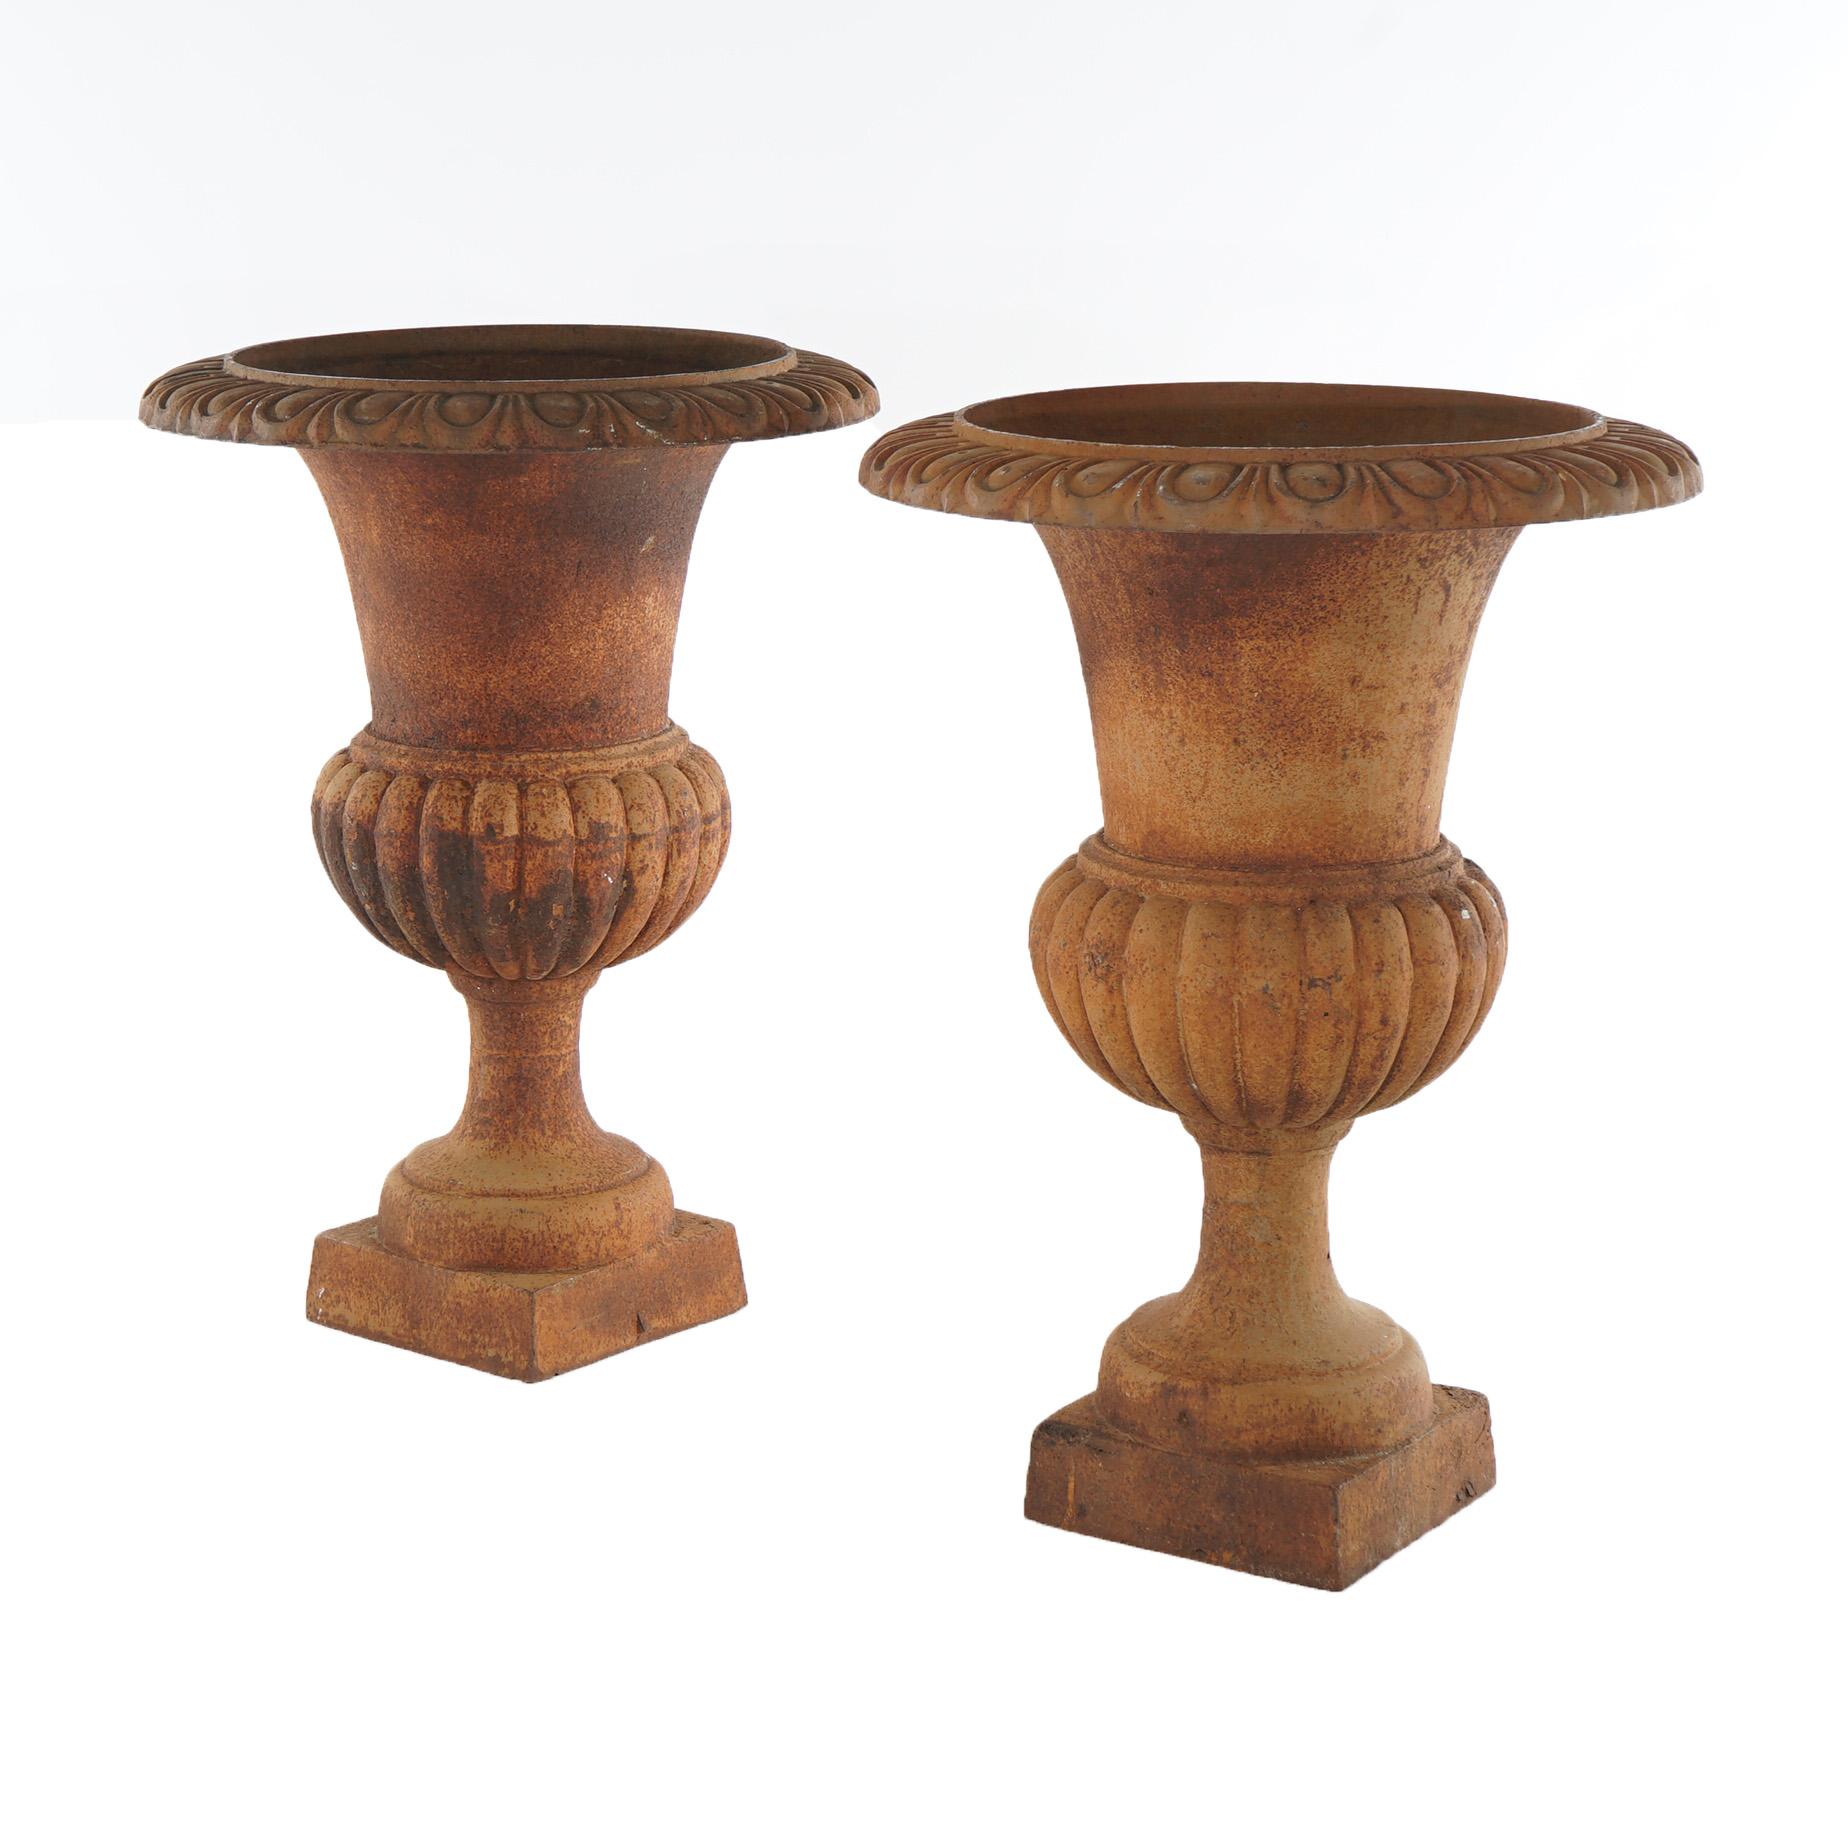  A pair of large Neoclassical style garden urns offer cast iron construction with decorated rim and melon form bowl, 20th century

Measures - 30